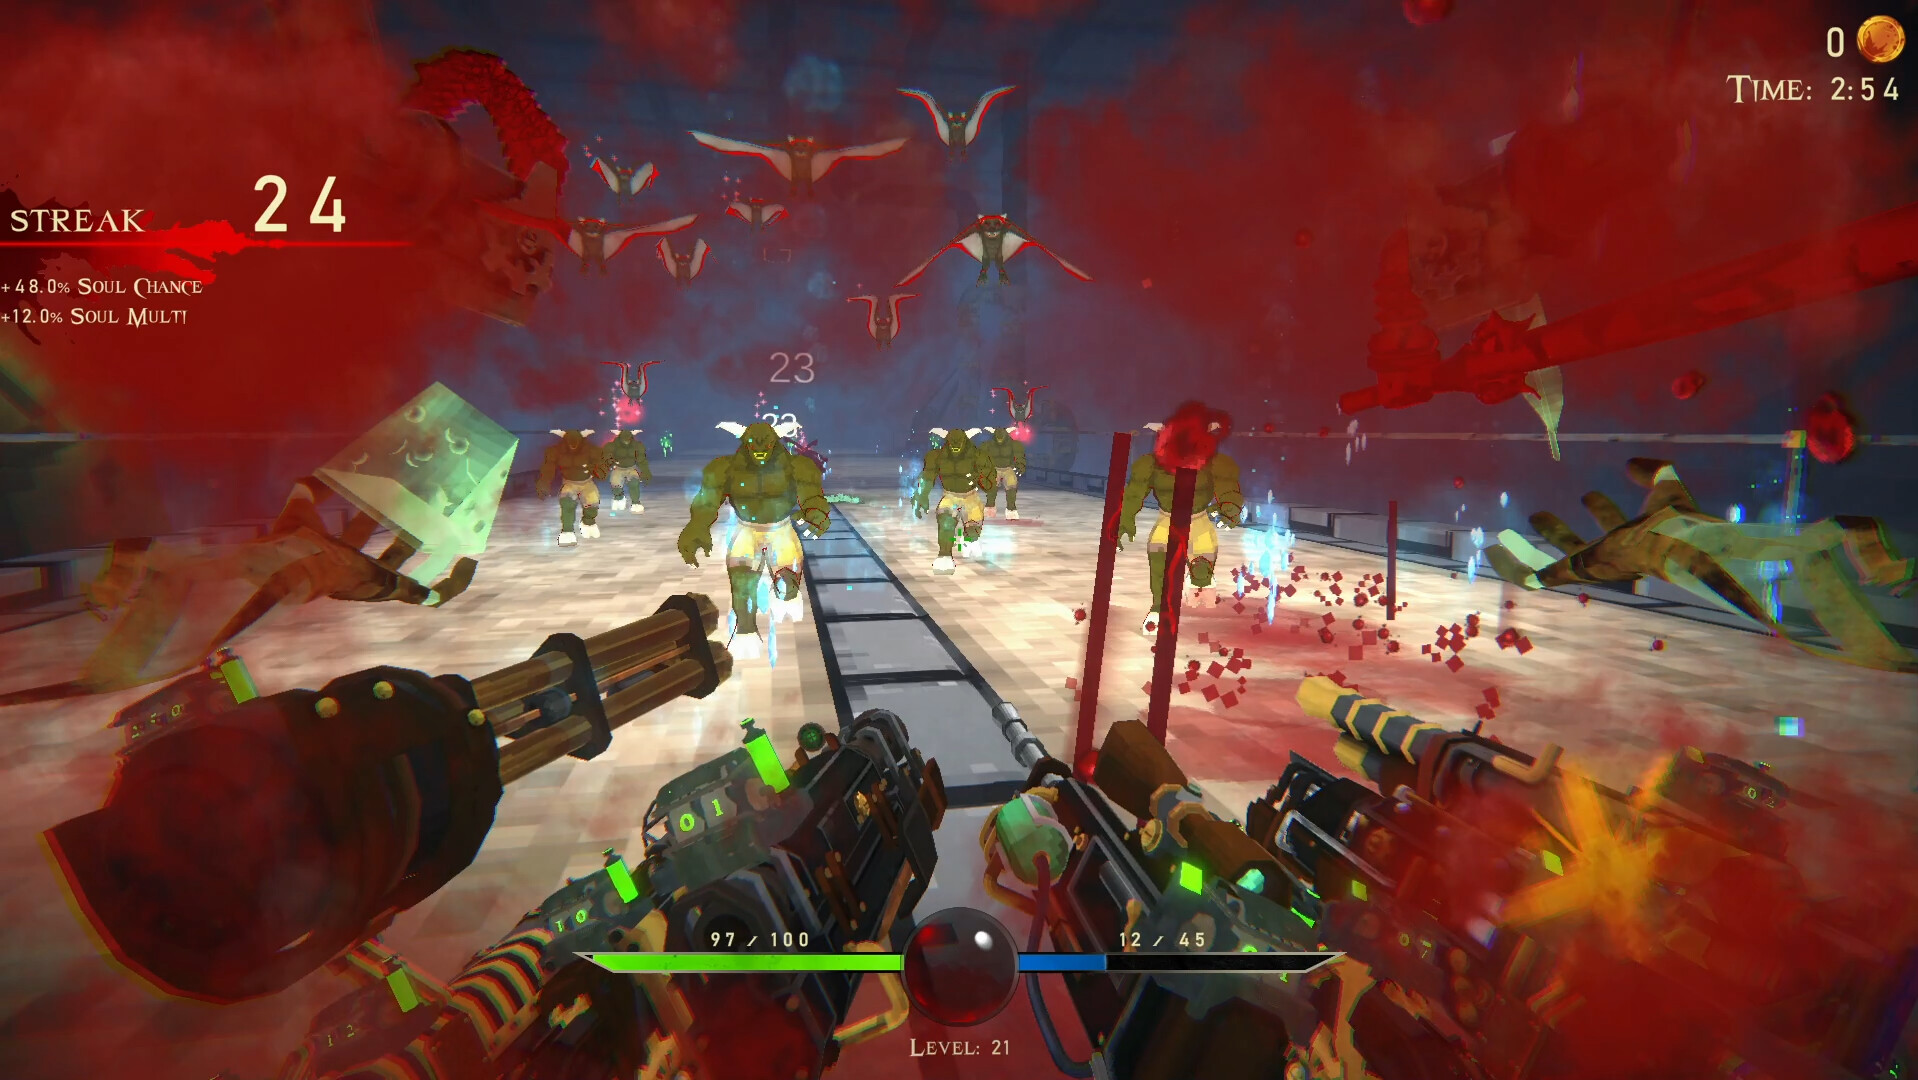 Roguelite FPS 'Vampire Hunters' Now on Steam in Early Access [Trailer] -  Bloody Disgusting